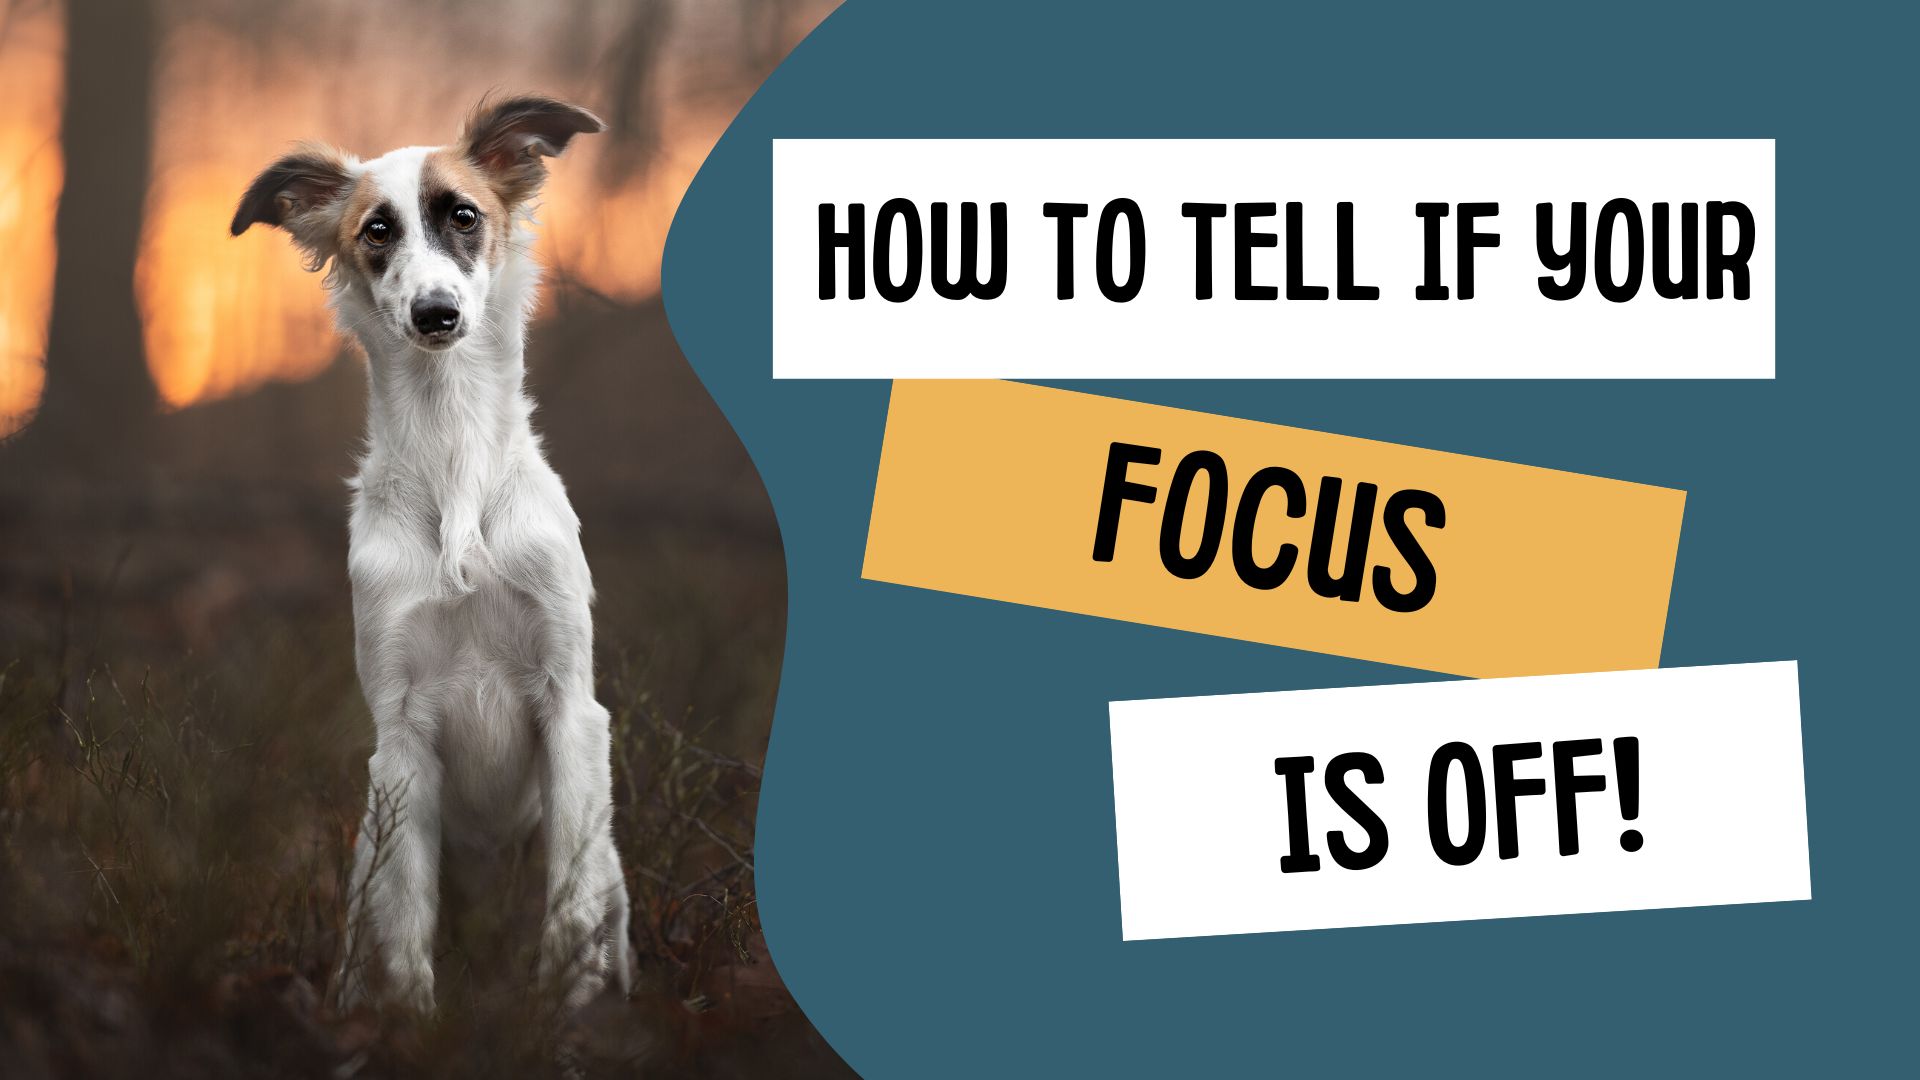 How to tell if your focus is off